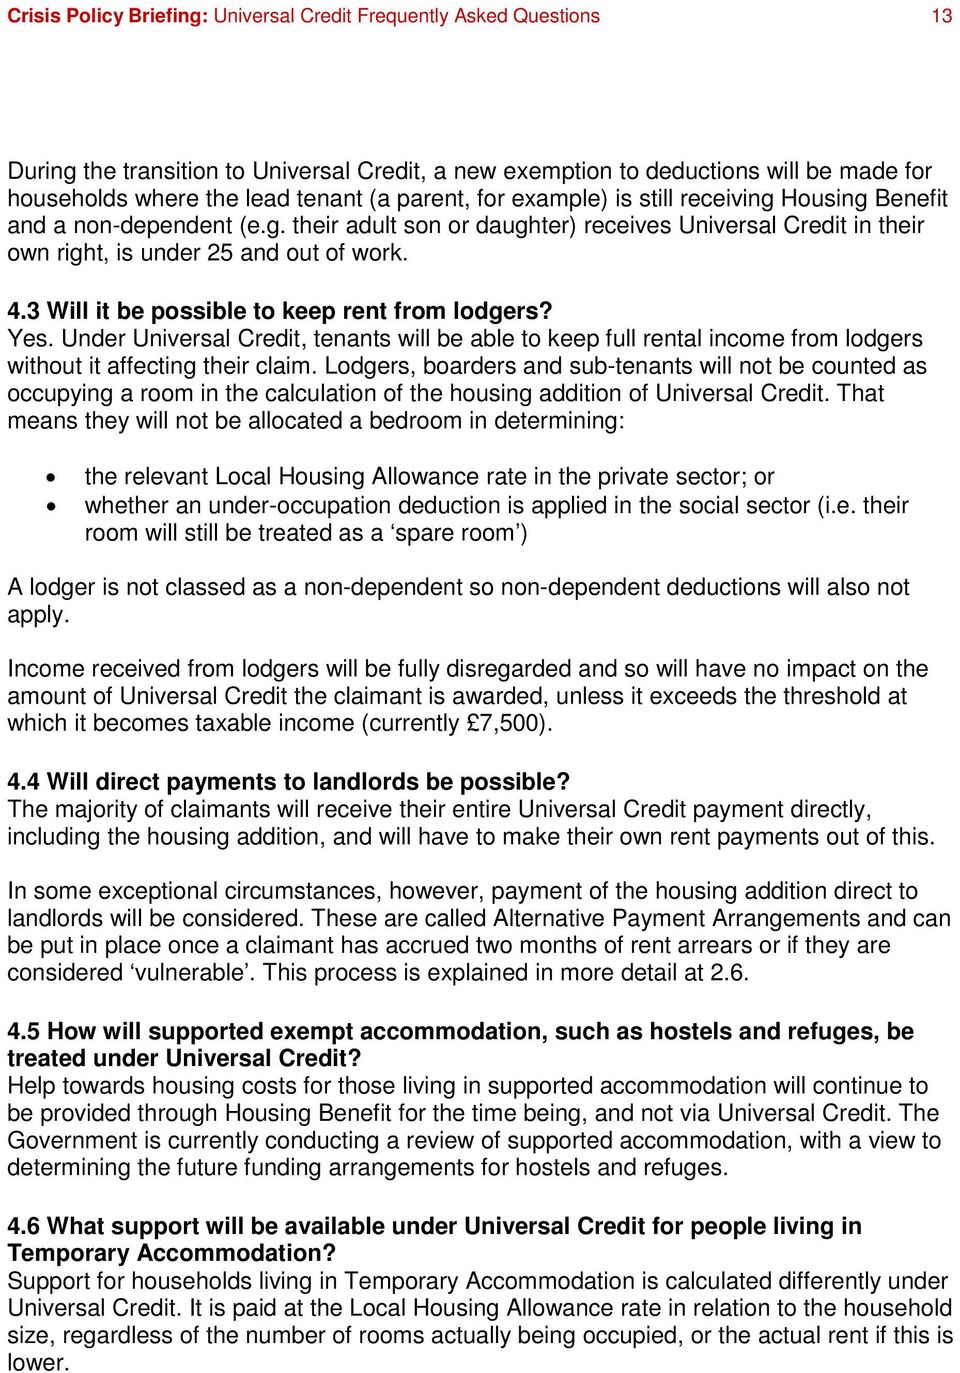 3 Will it be possible to keep rent from lodgers? Yes. Under Universal Credit, tenants will be able to keep full rental income from lodgers without it affecting their claim.